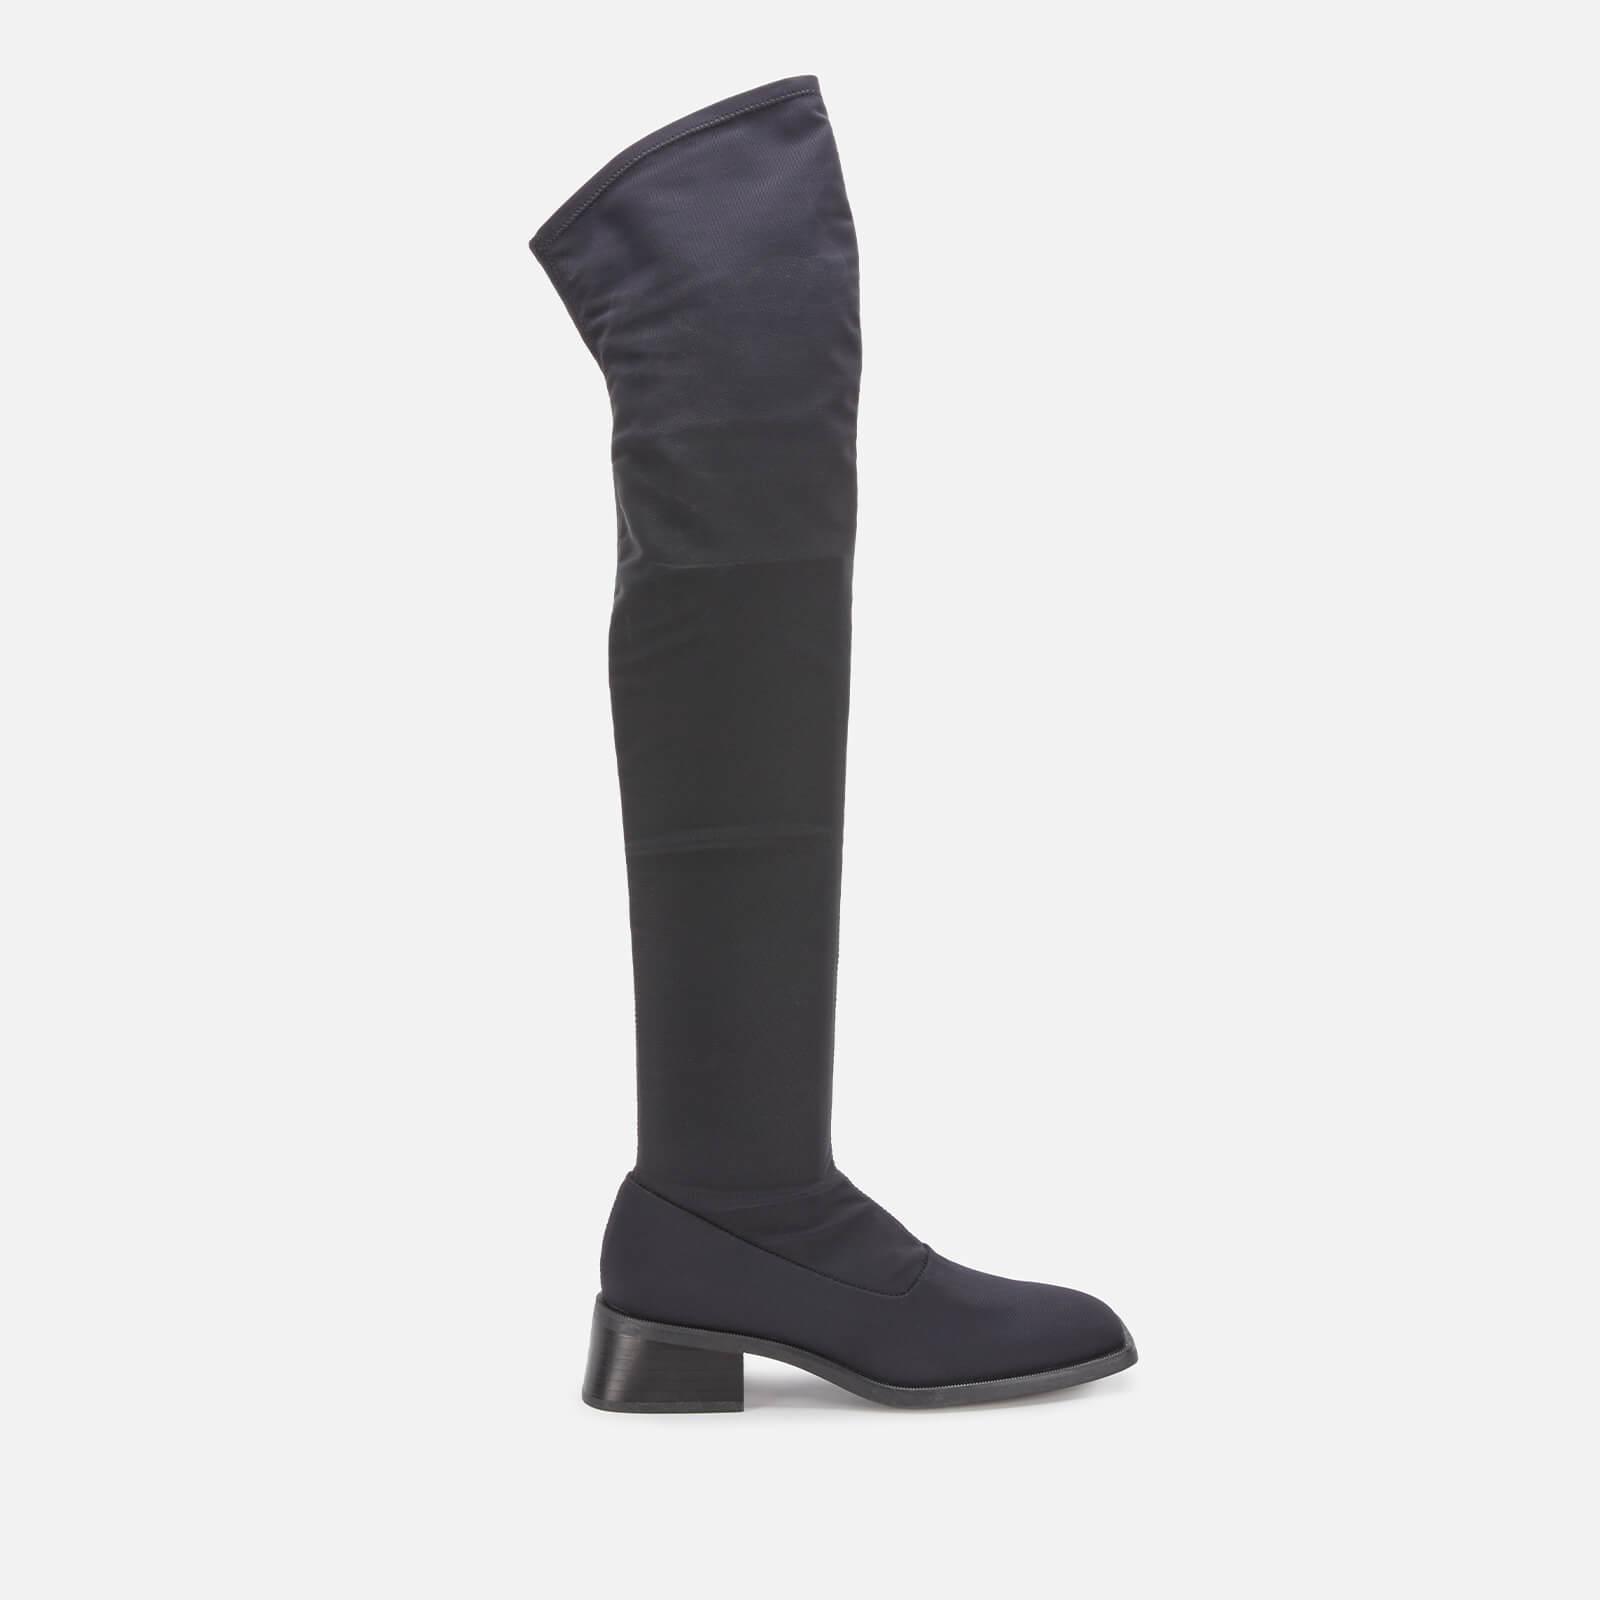 Vagabond Shoemakers Blanca Stretch Over The Knee Boots in Black | Lyst